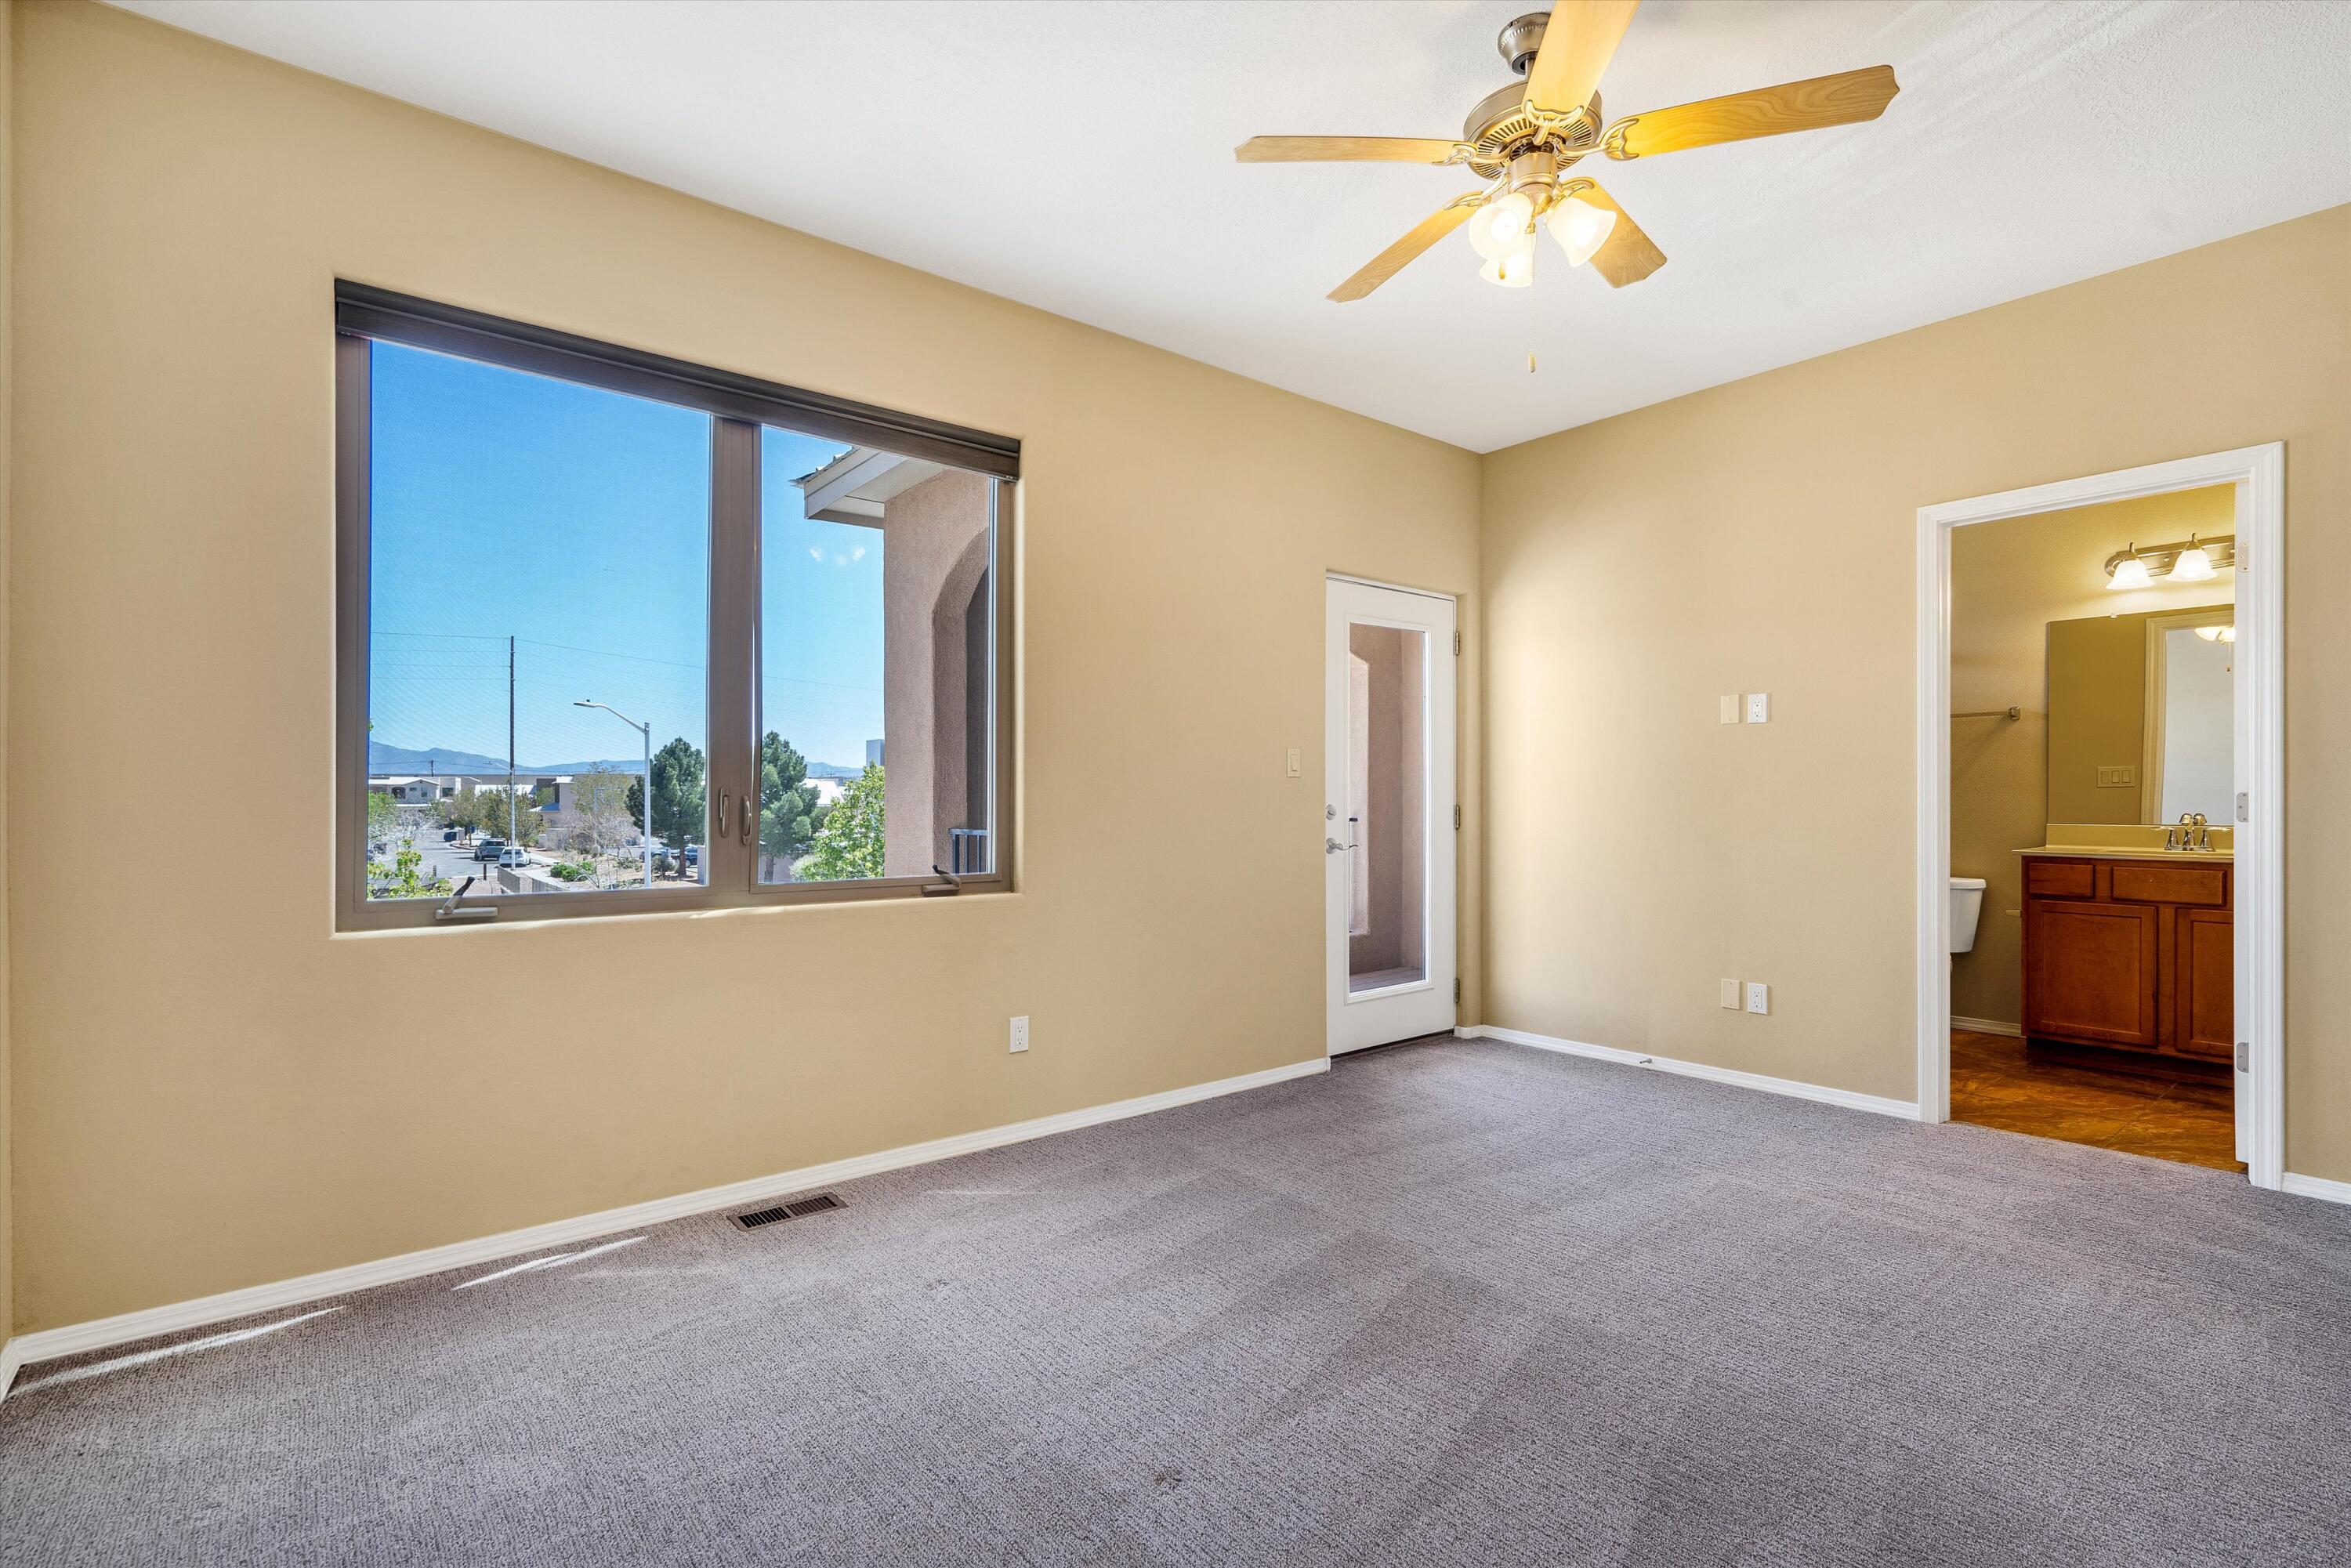 1767 Band Saw NW, Albuquerque, New Mexico 87104, 2 Bedrooms Bedrooms, ,3 BathroomsBathrooms,Residential,For Sale,1767 Band Saw NW,1060693